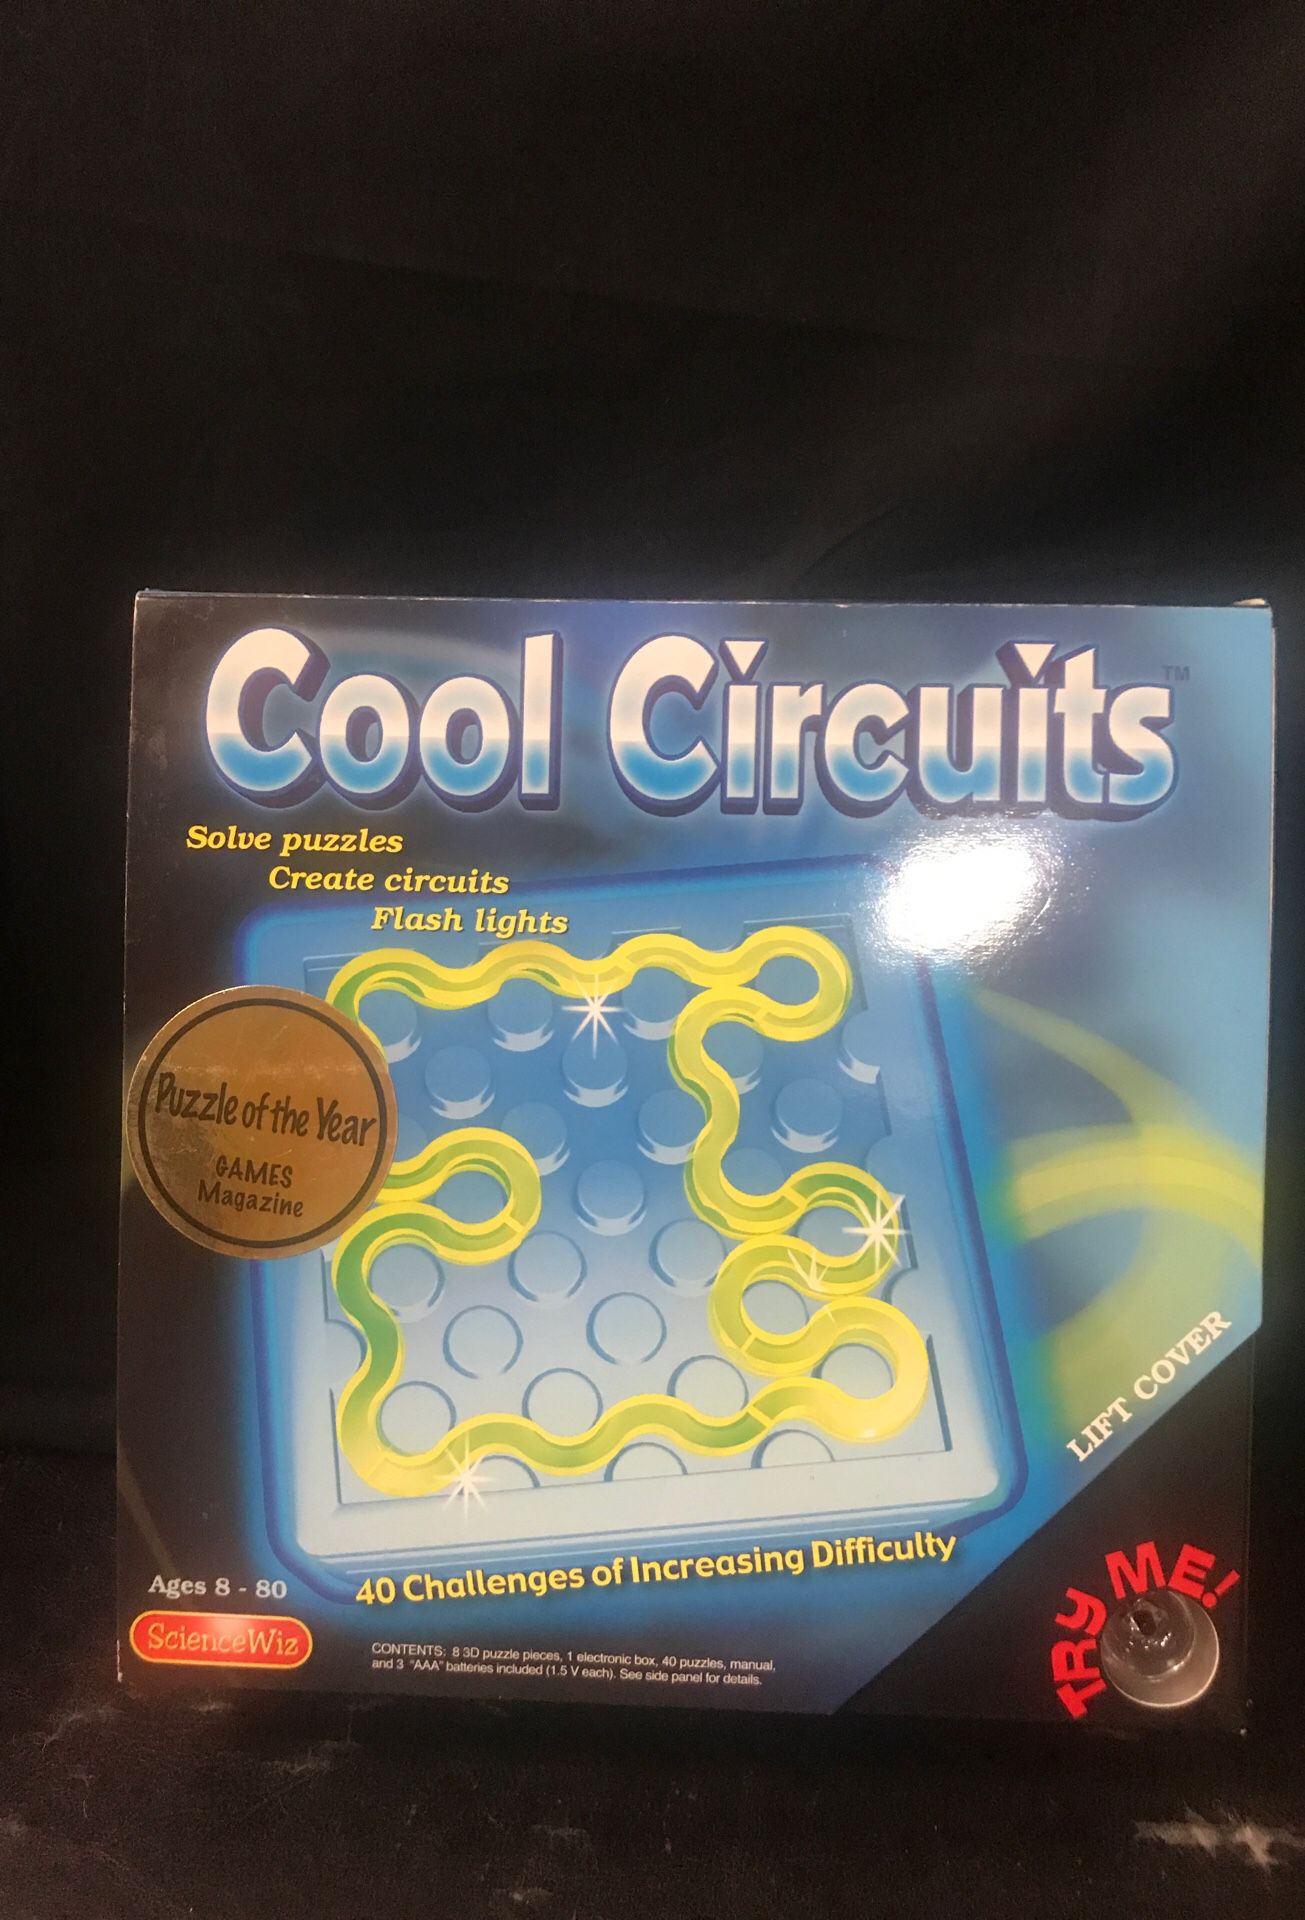 Science Wiz - Cool Circuits Puzzle Game.